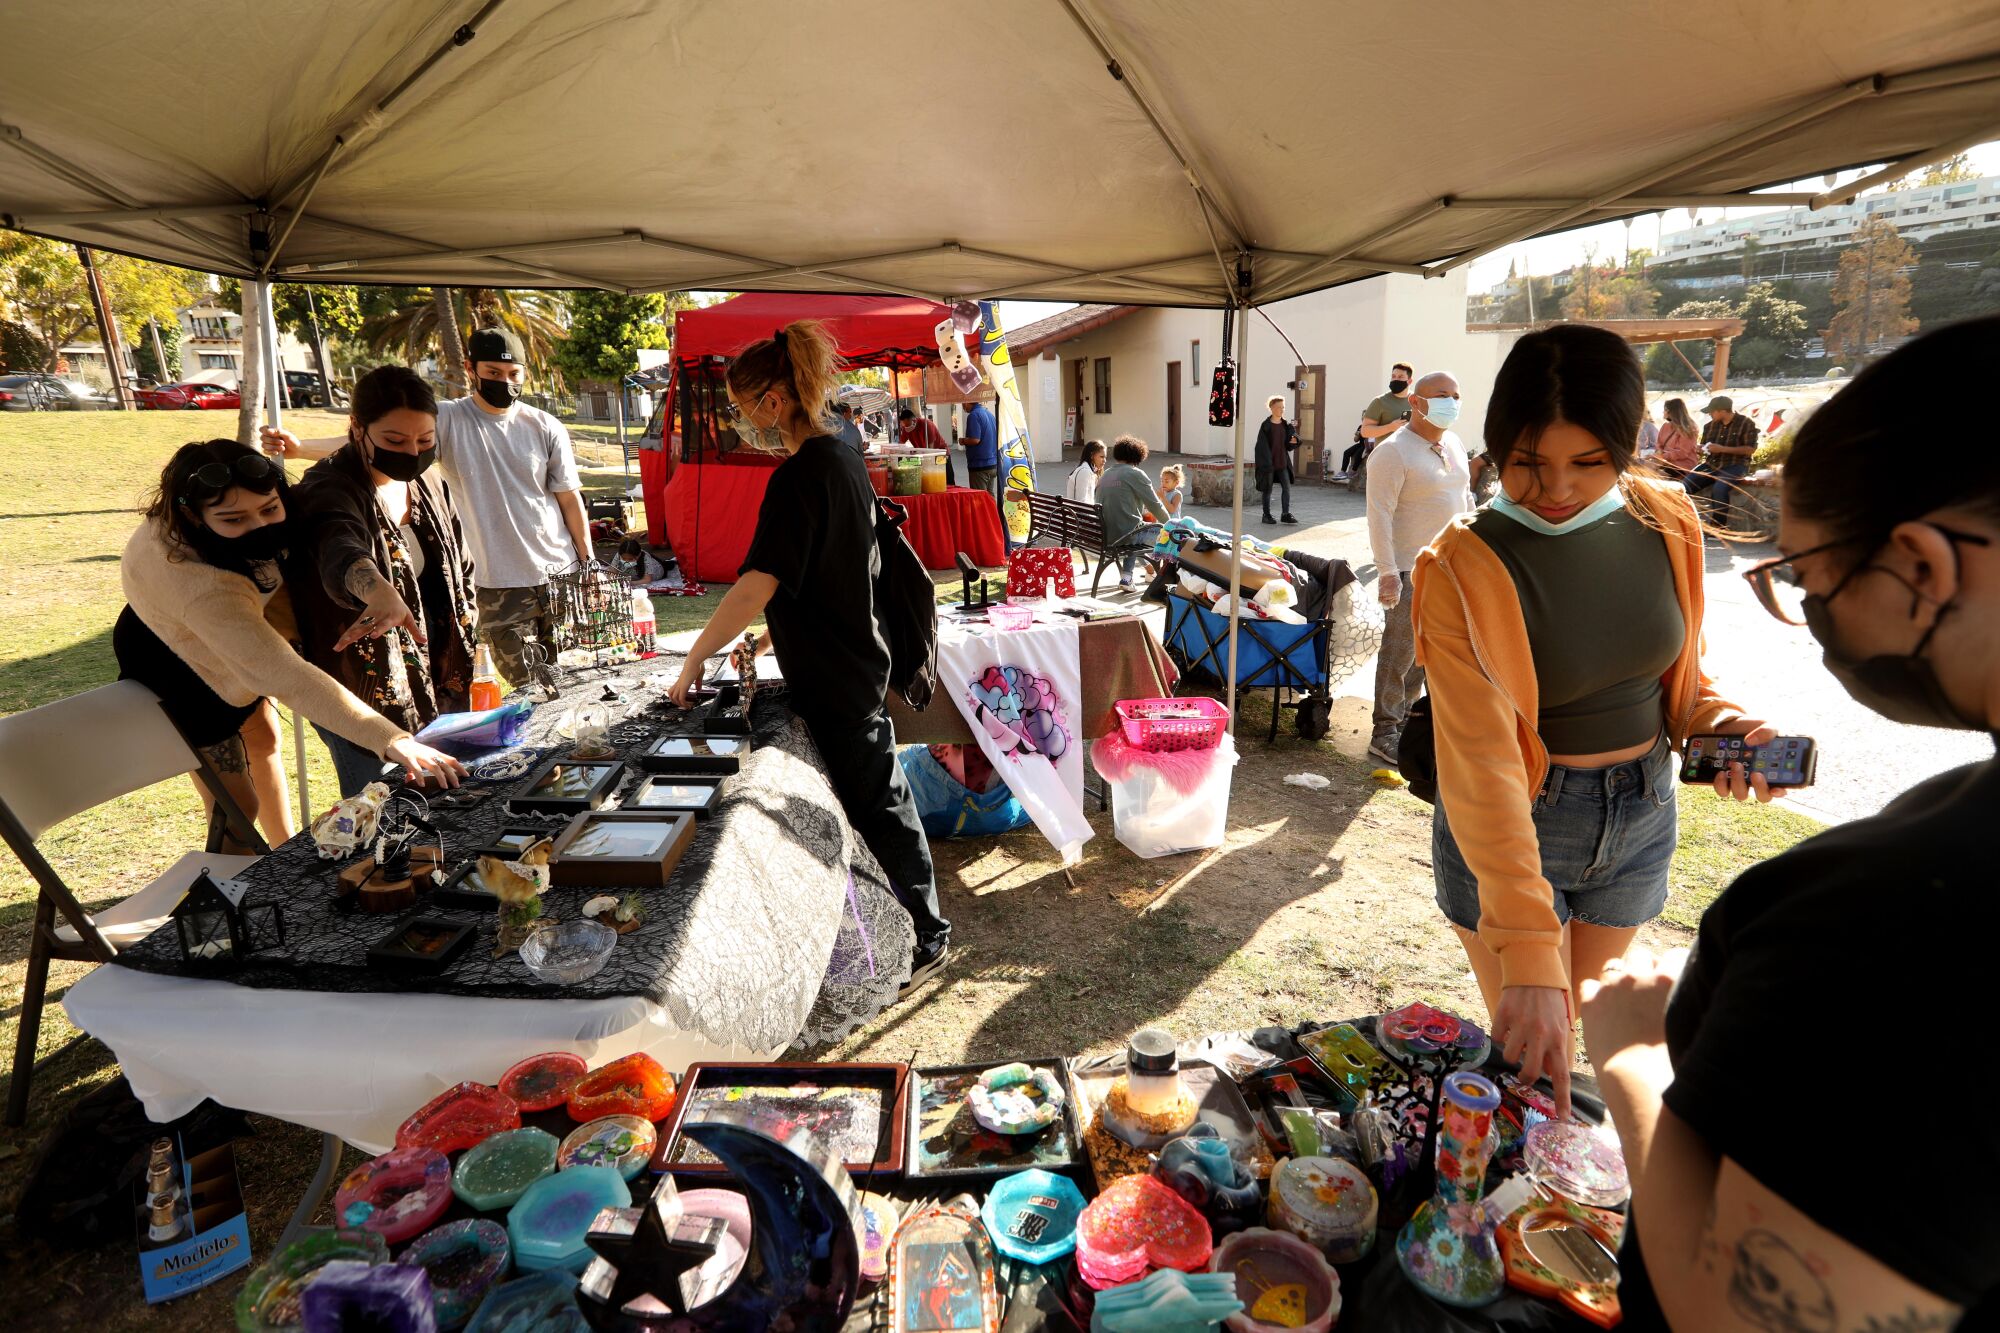 Alejandra Leal, second from left, has oddities for sale in Echo Park.